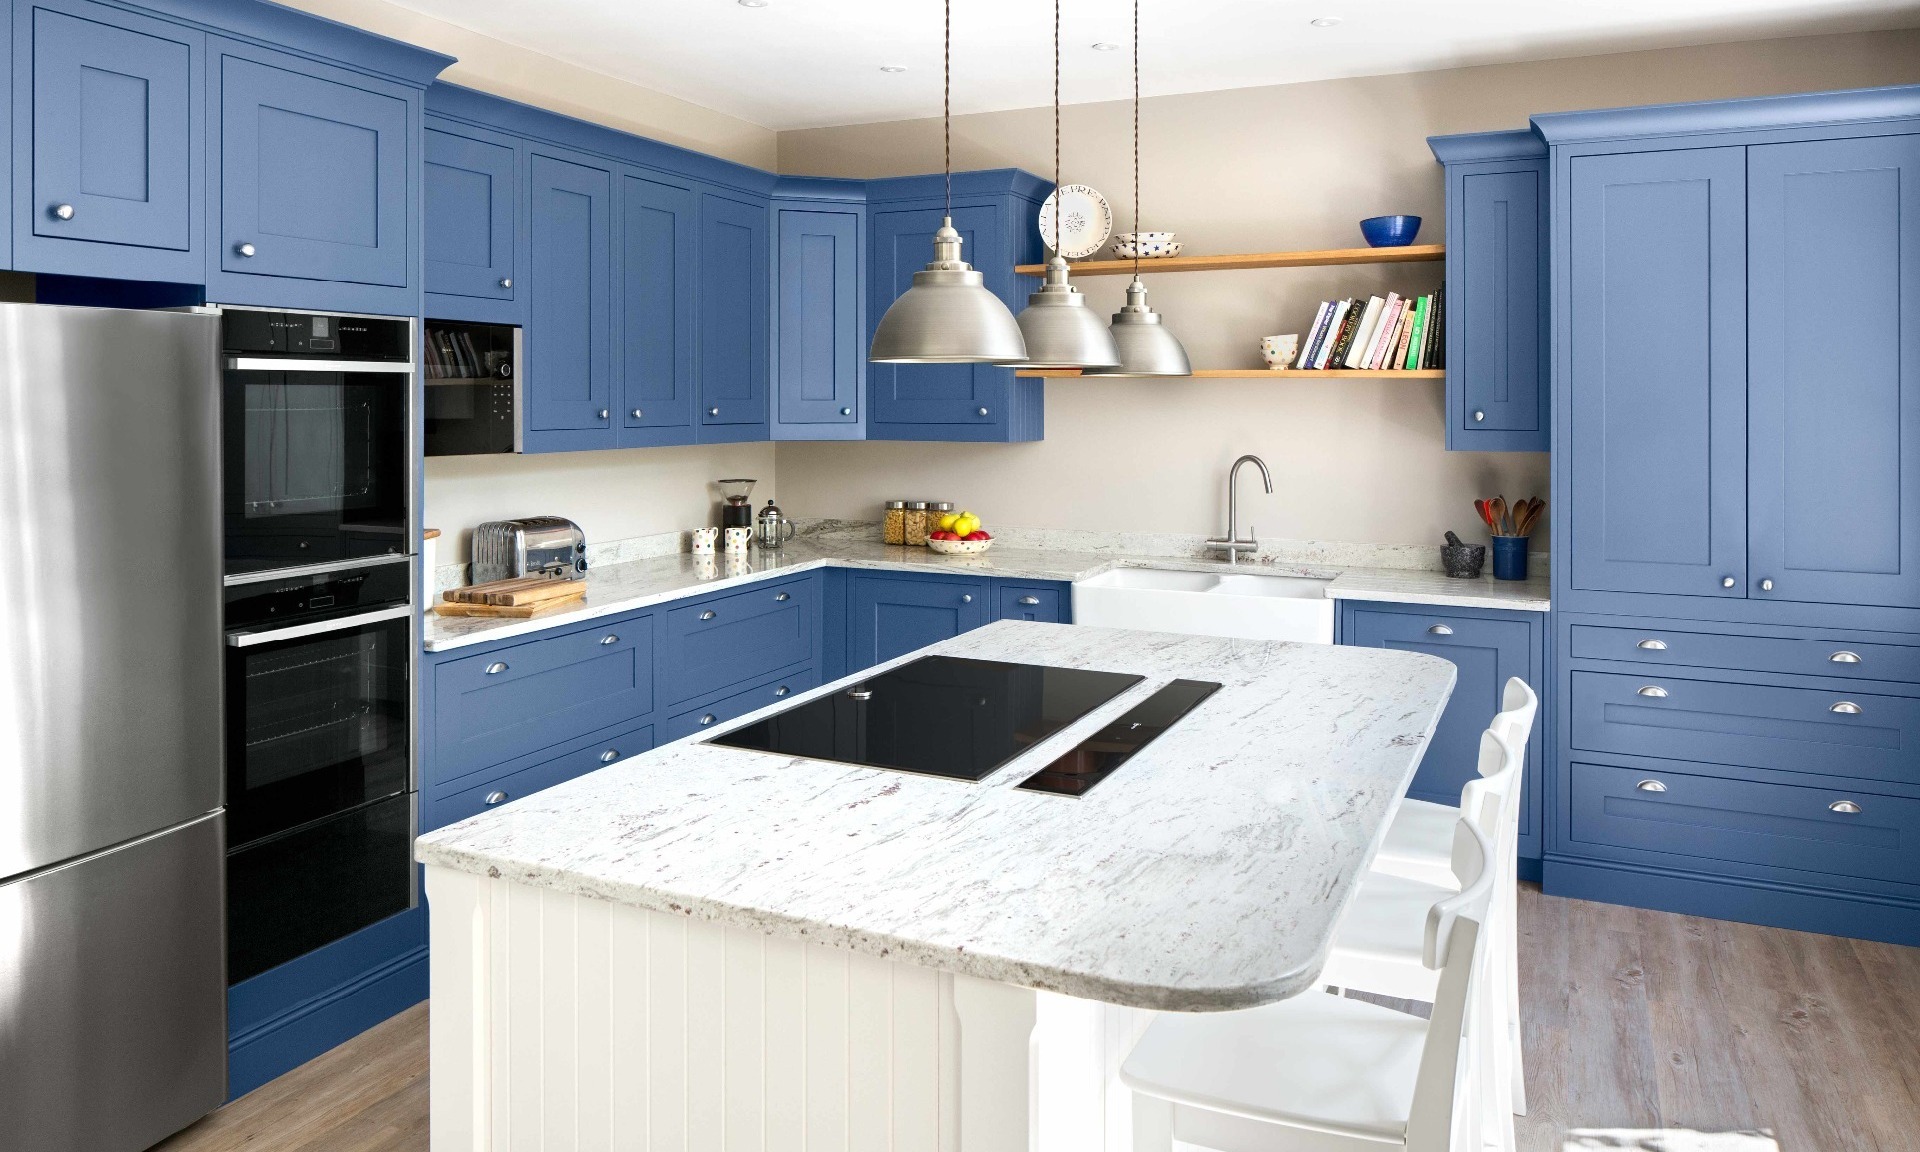 Inframe painted kitchen in royal blue